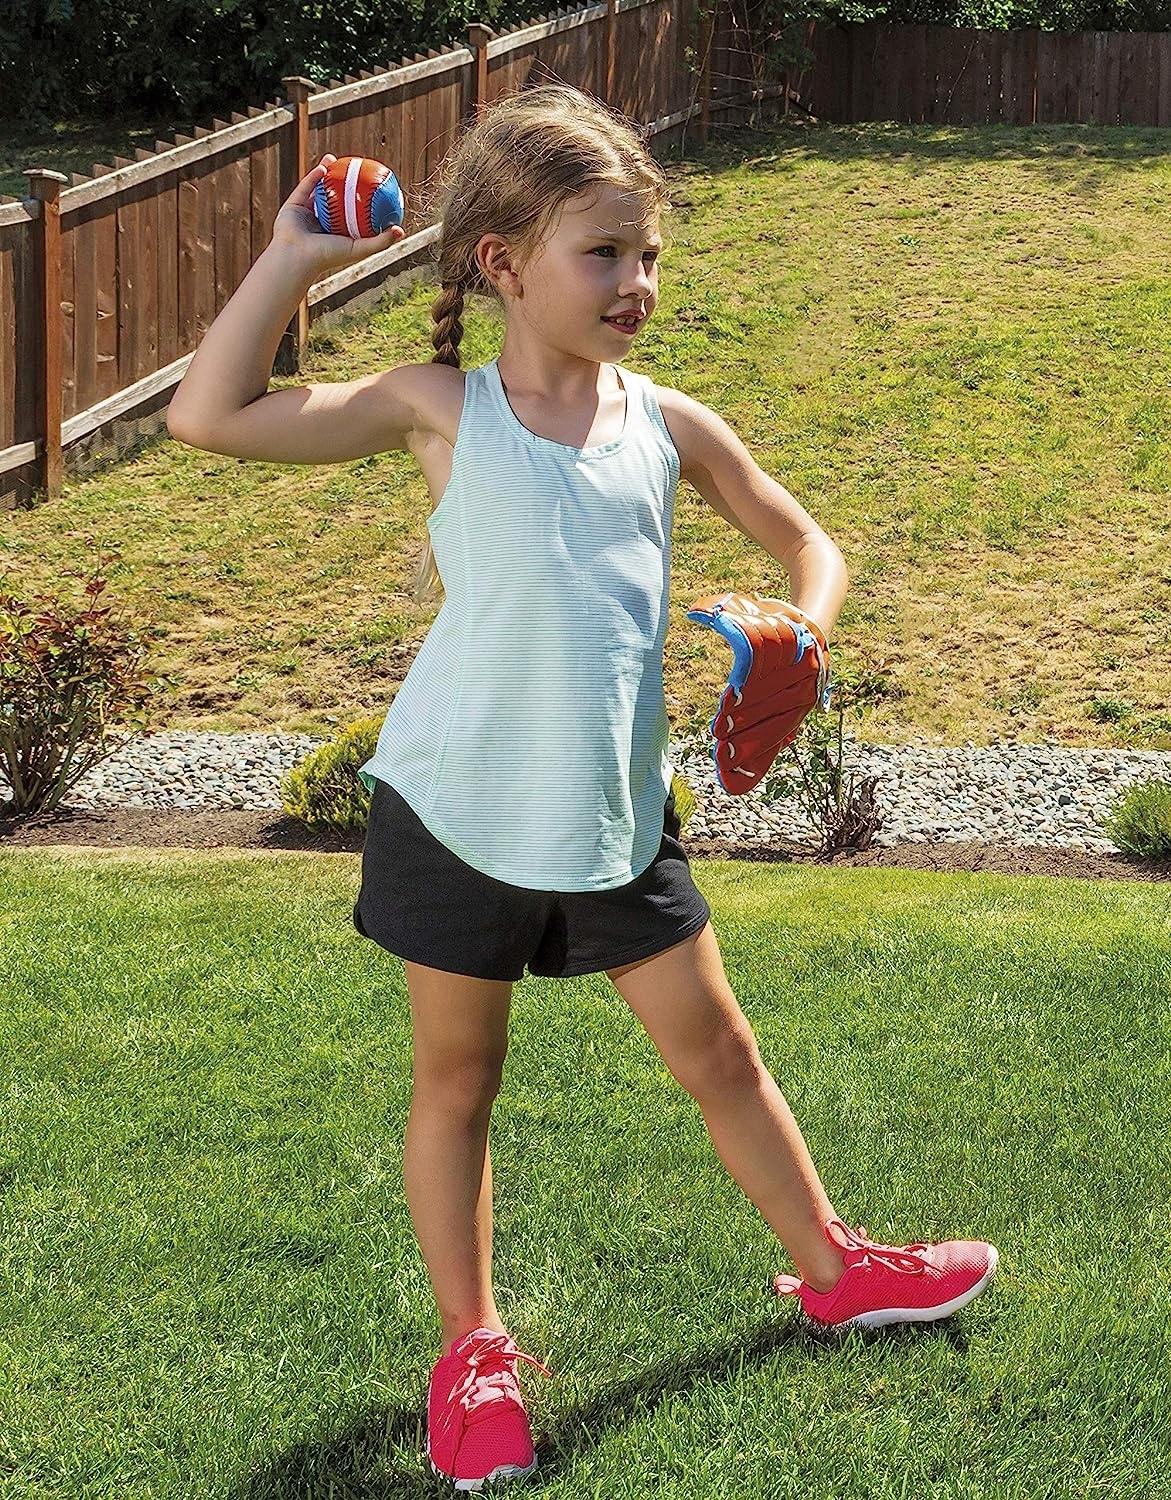 Child with red and blue mitt on hand throwing ball with the other hand